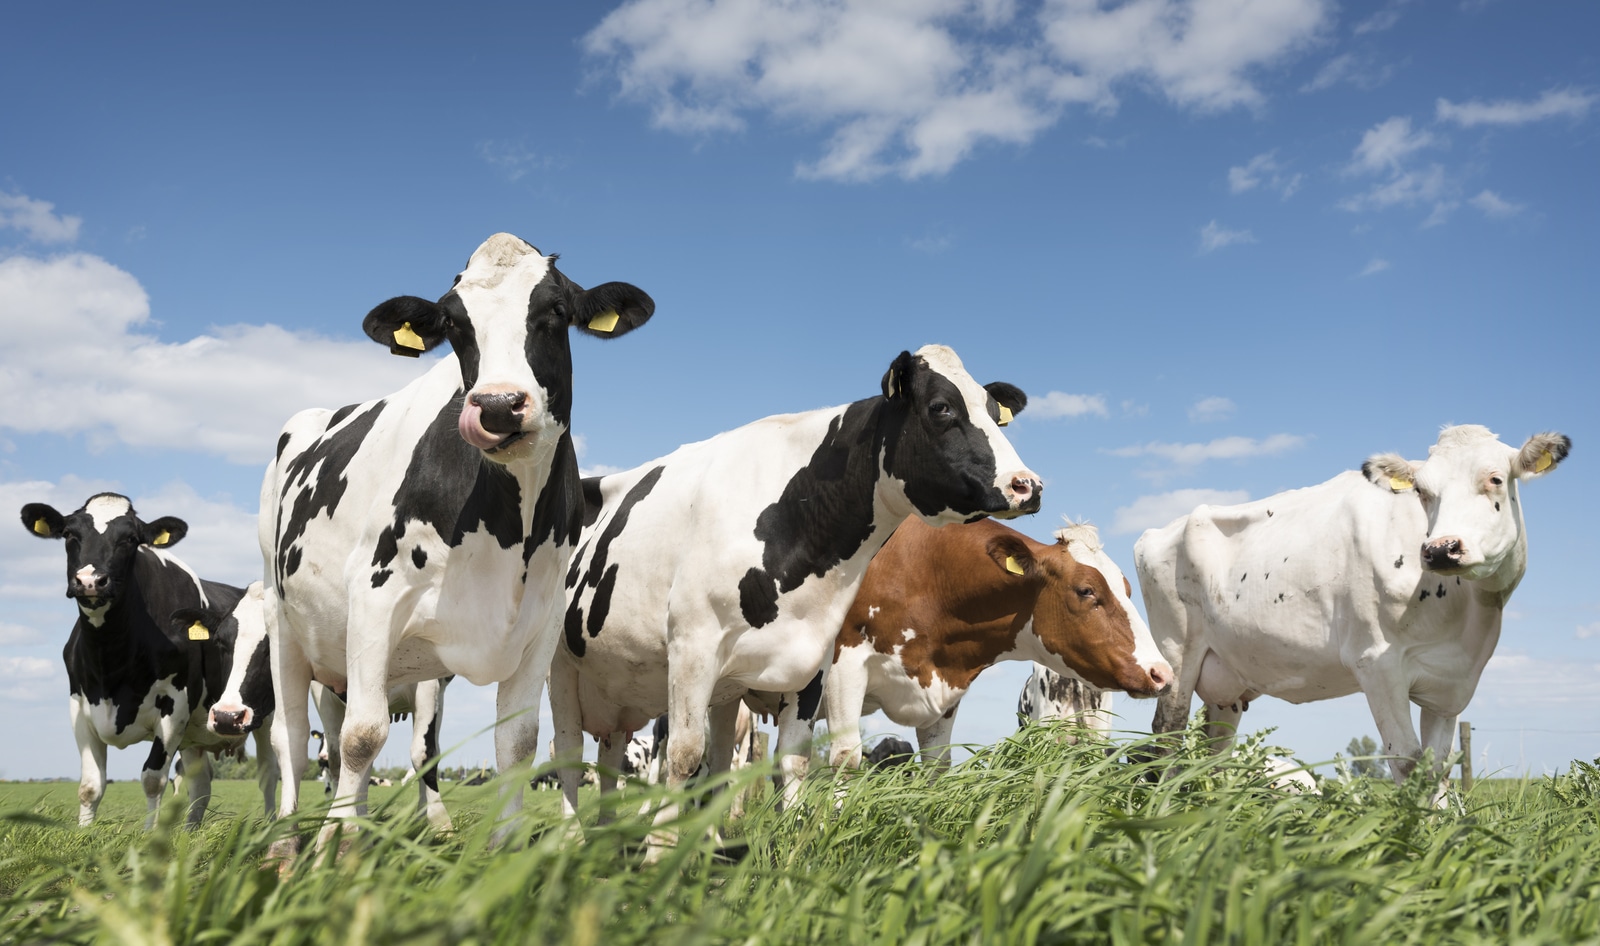 Vegan and Cell-Based Researchers Secure $3 Million Grant to Make Animal Agriculture Obsolete